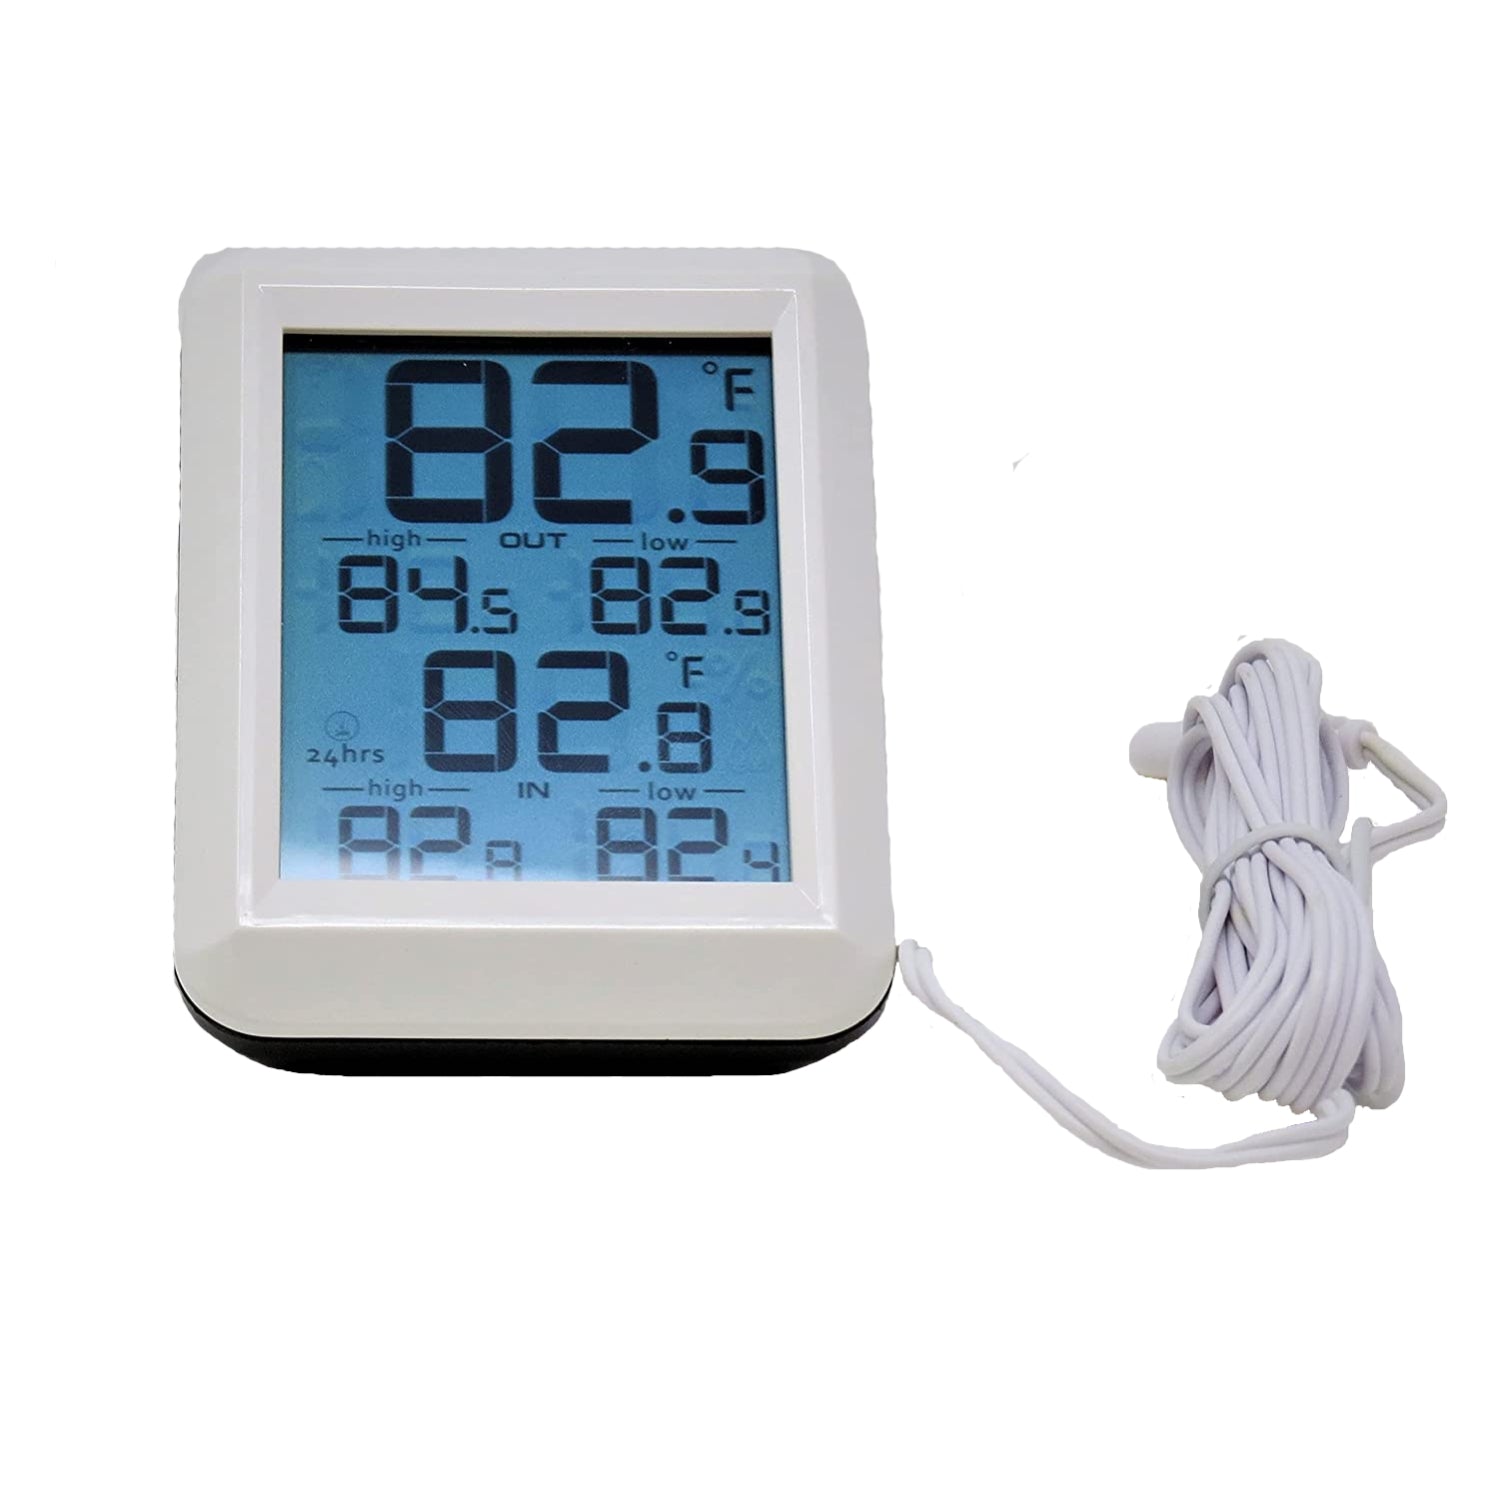 Humidity and Temperature Monitor - AIMILAR Digital Indoor Thermometer with  High Low History, ℉ / ℃ Selectable, Easy to Use, Calibrate-able, Magnetic